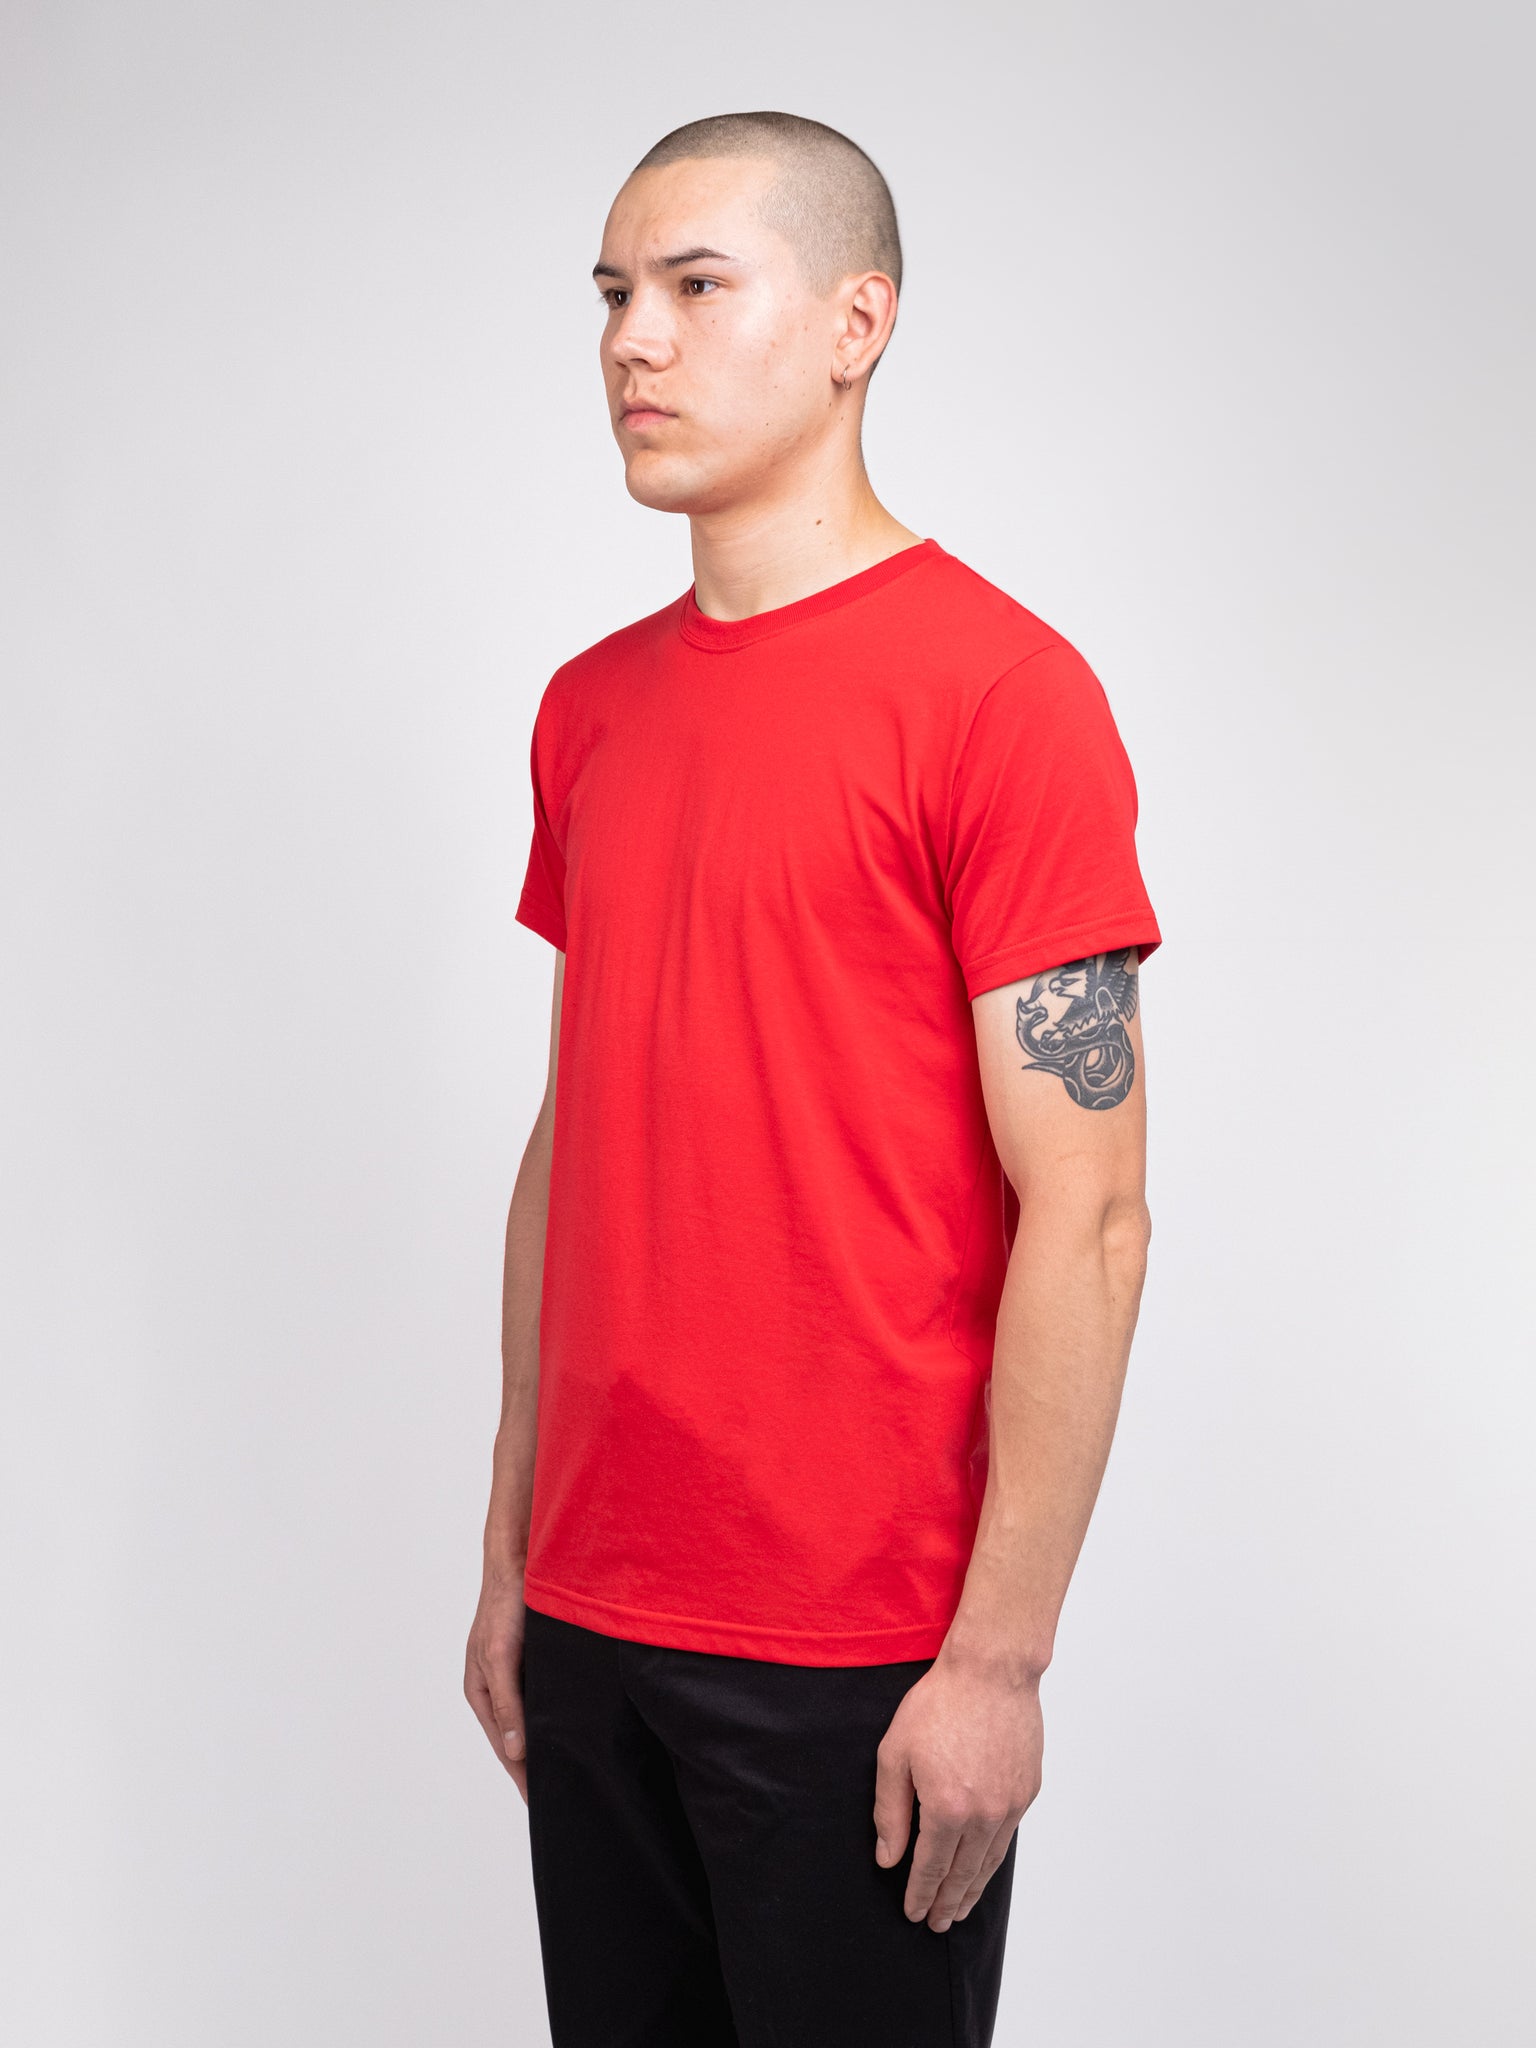 Fit T-Shirt - v2 ADAPTURE Slim – Fire Whirl